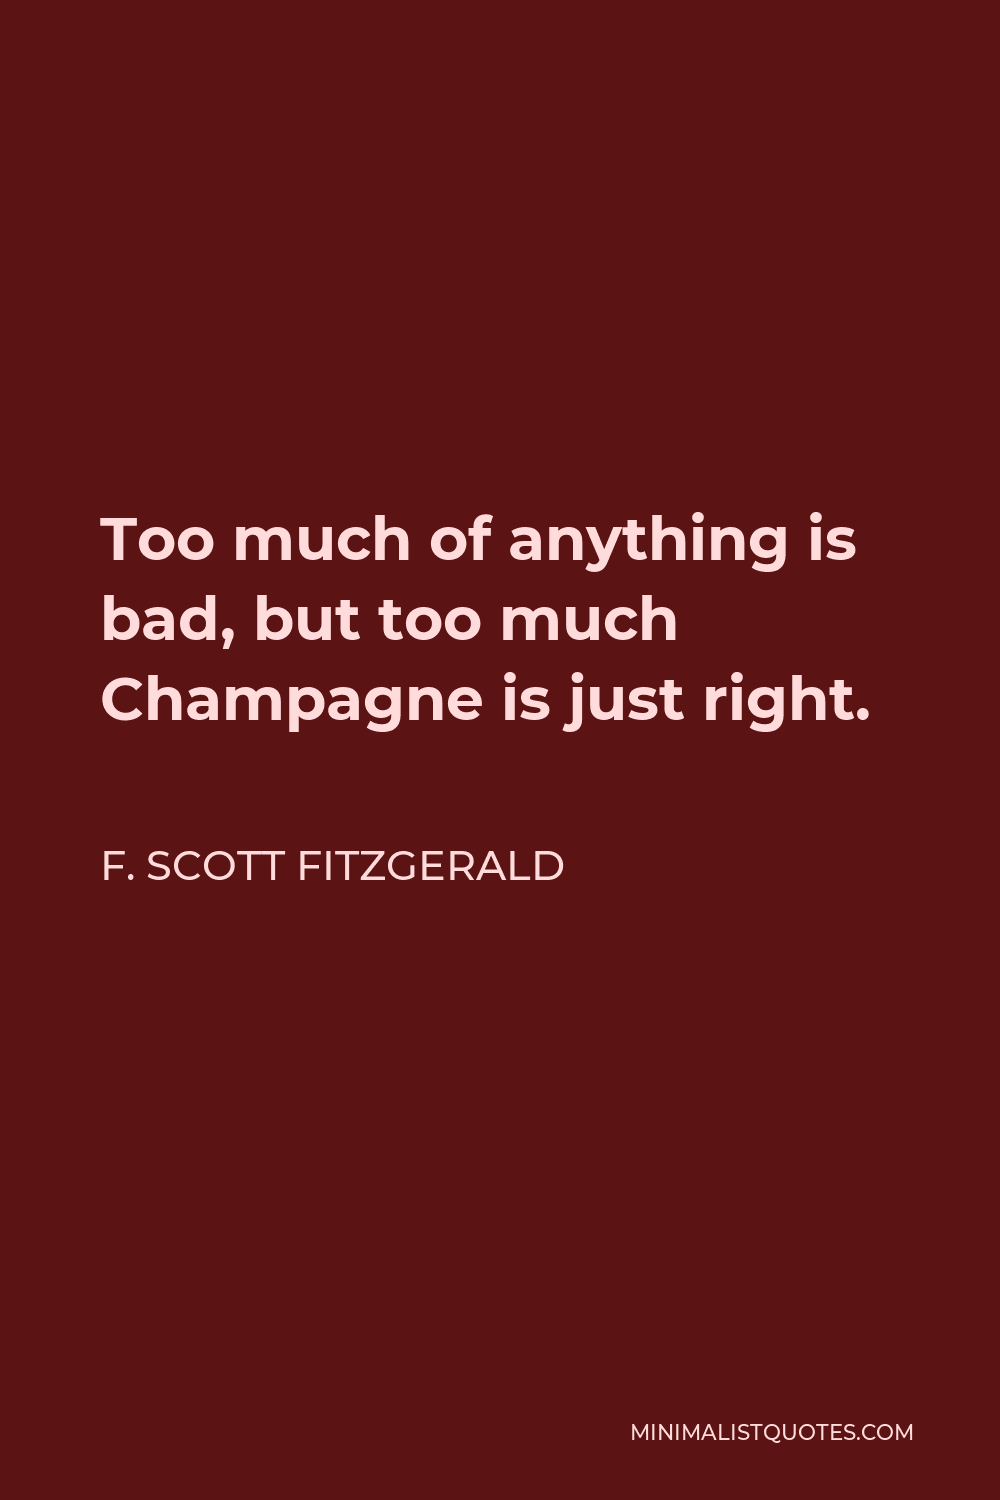 F. Scott Fitzgerald Quote - Too much of anything is bad, but too much Champagne is just right.